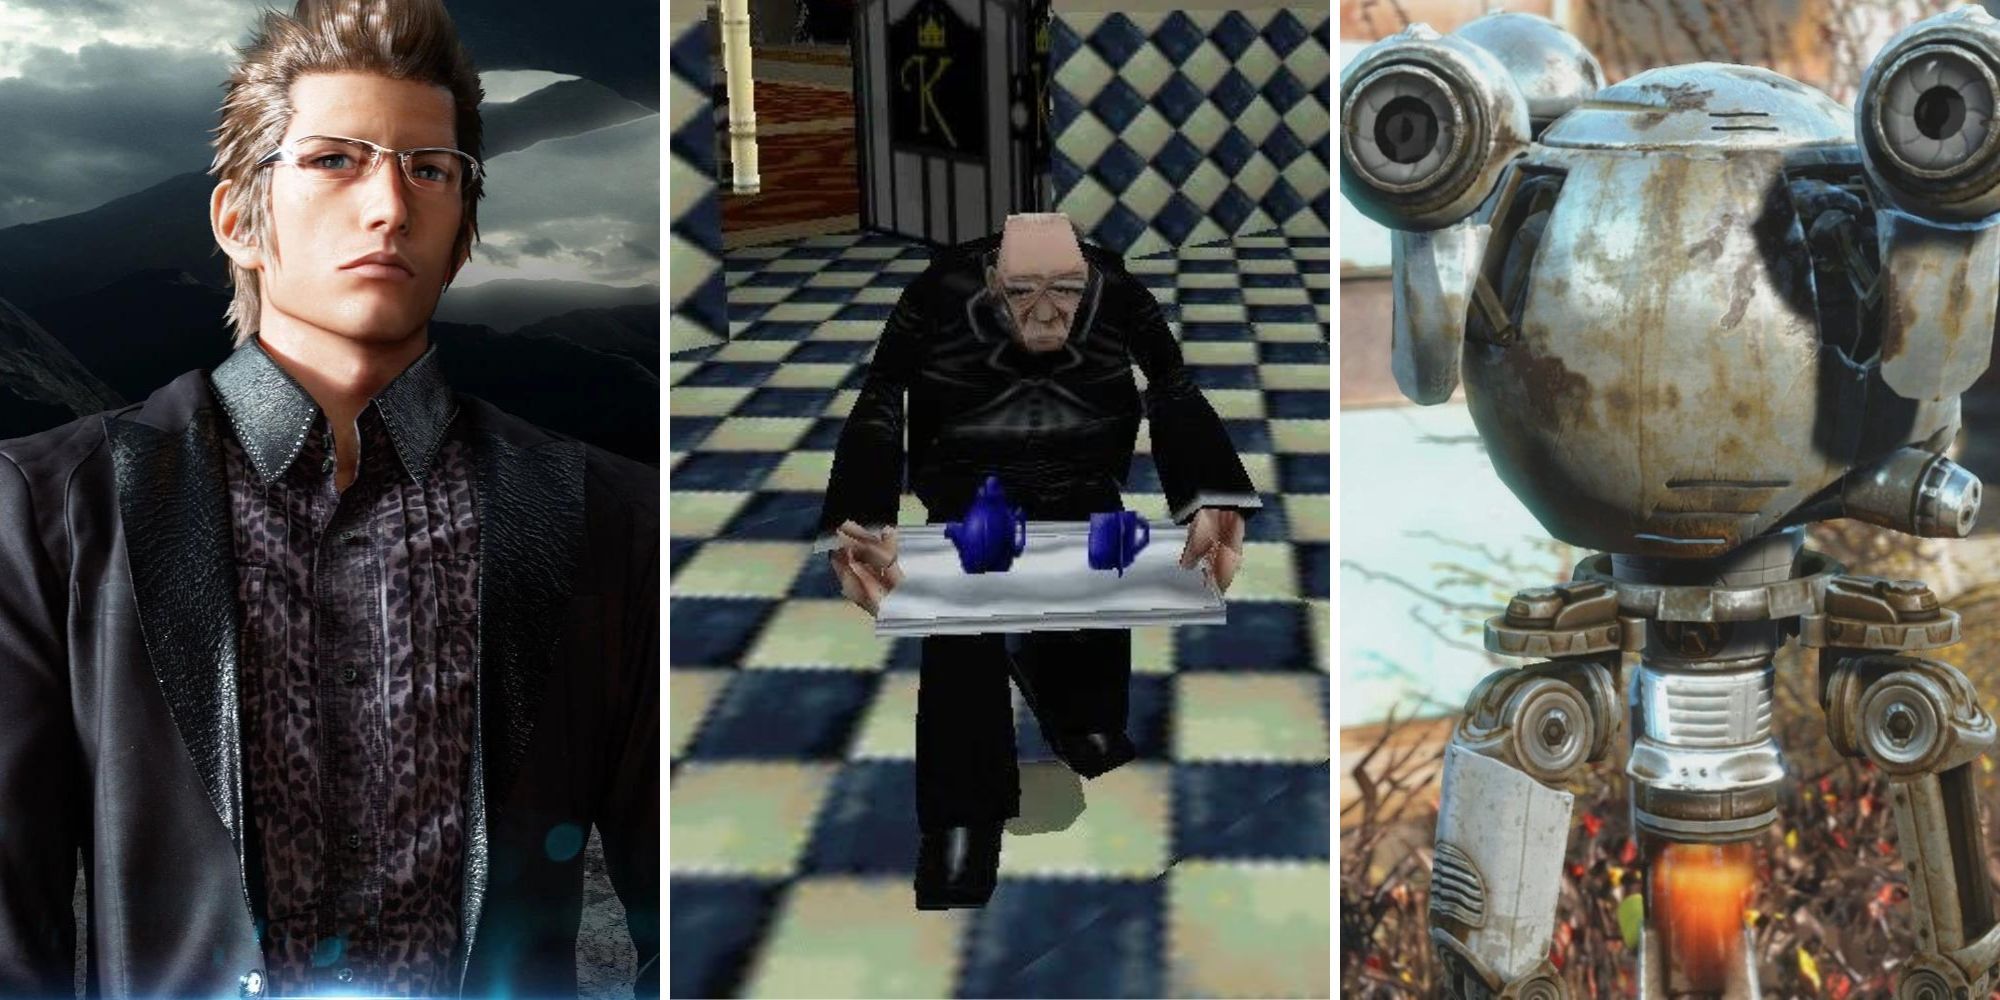 A grid showing the best butlers from three games including Ignis from Final Fantasy 15, Winston from Tomb Raider 2, and Codsworth from Fallout 4